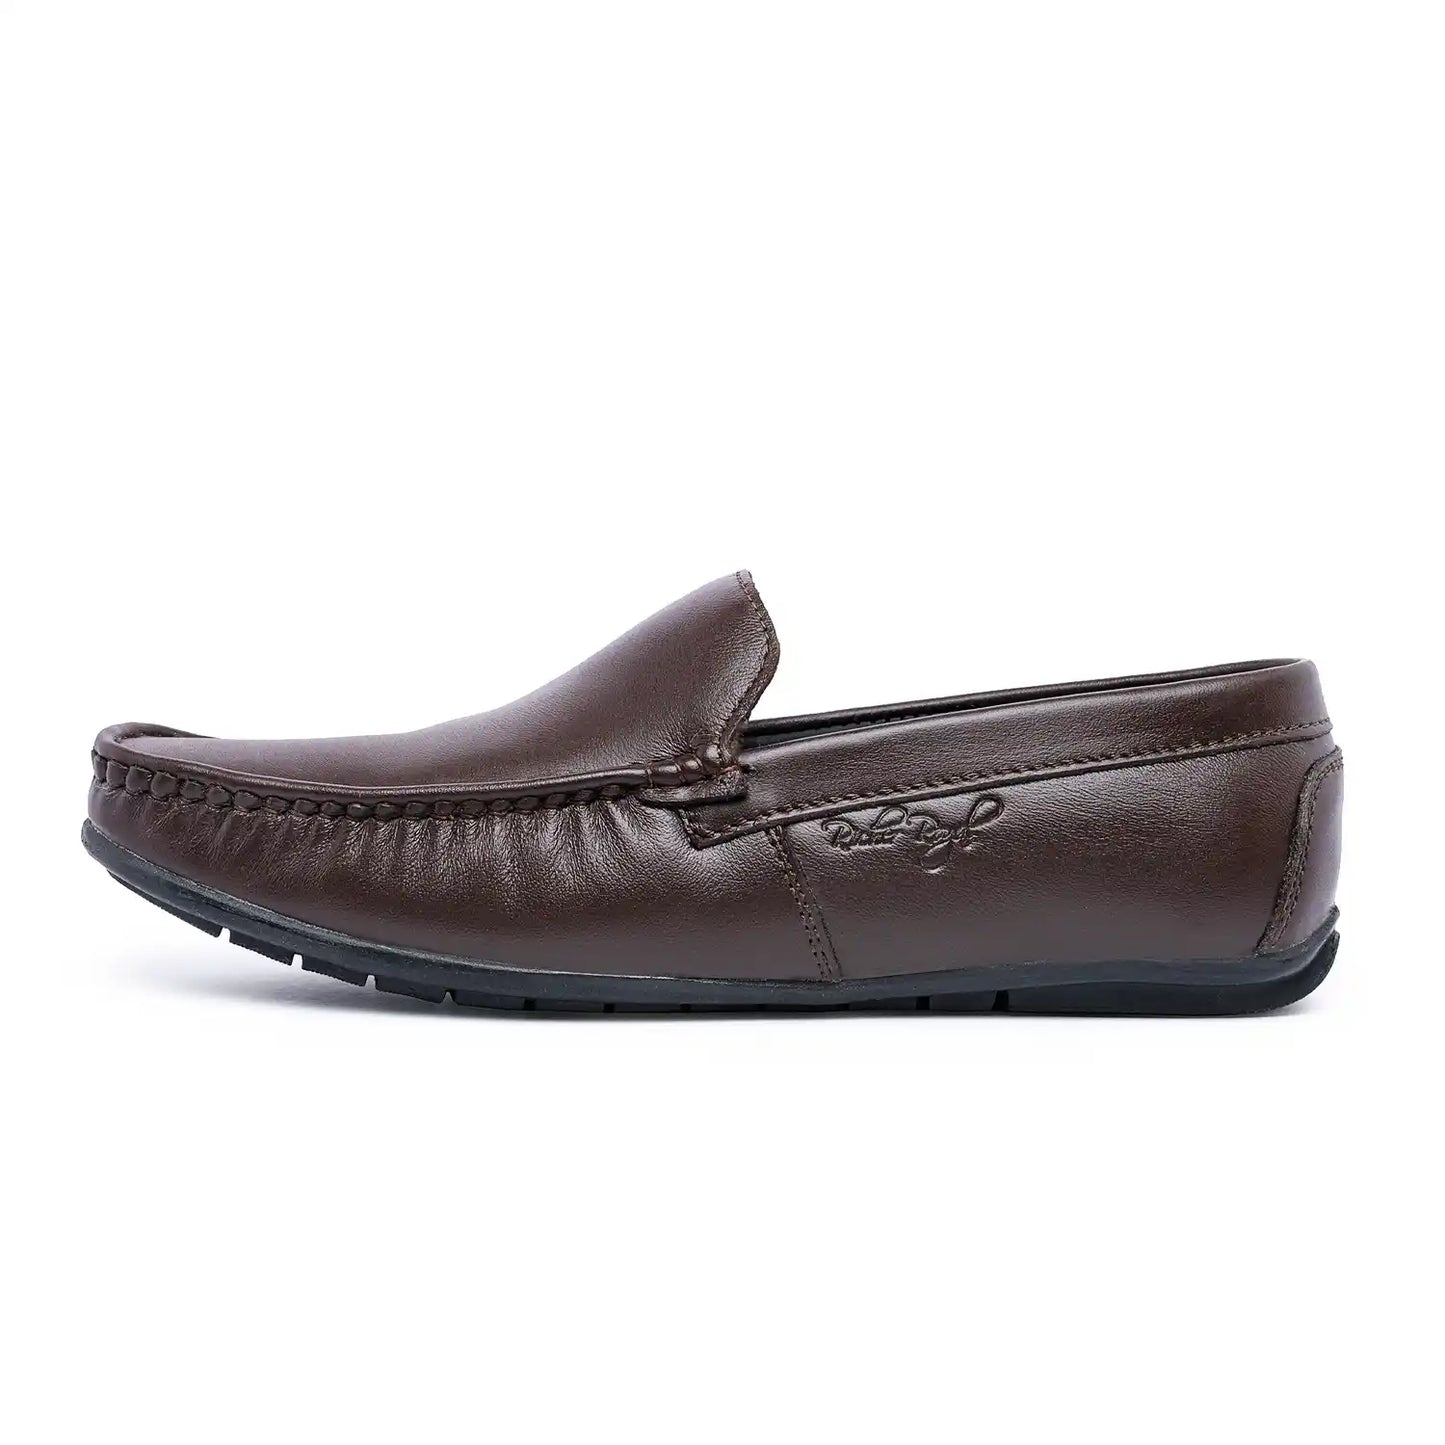 Loafers for Men Pure Leather Moccasins